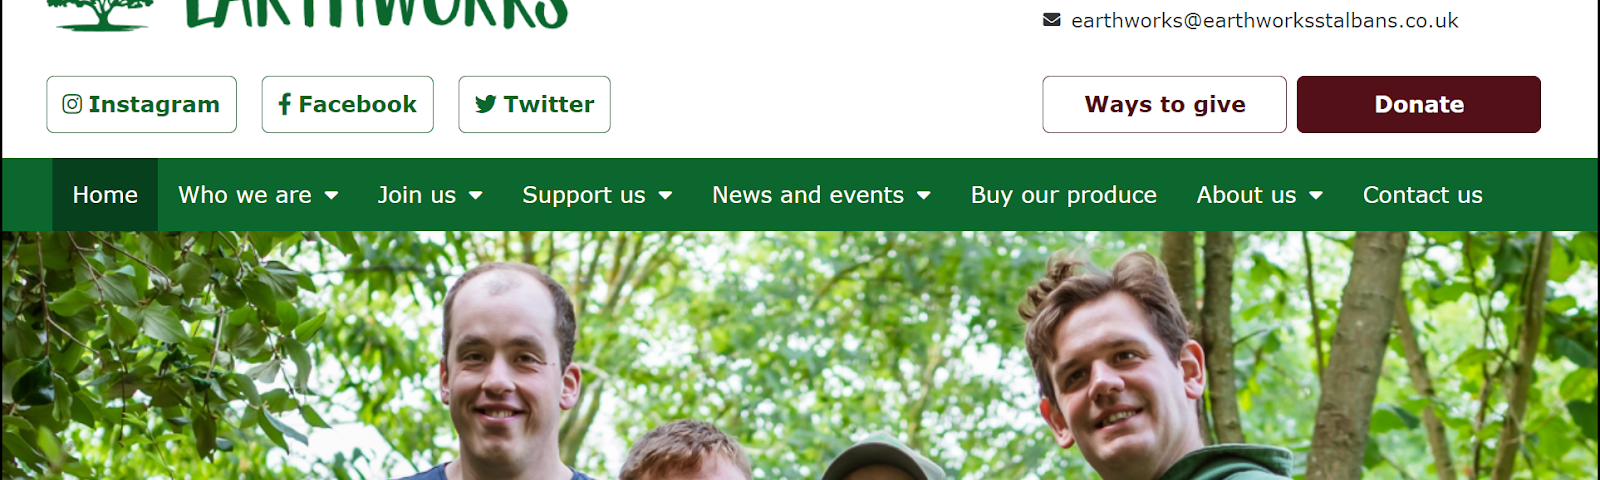 A screenshot of the new Earthworks homepage. It has 4 white male Earthworkers smiling at the camera against a backdrop of green-leafed trees. Above them the logo says ‘Earthworks’ and there are menu items to lots of different places on the website. In the foreground a banner says ‘Welcome to Earthworks’